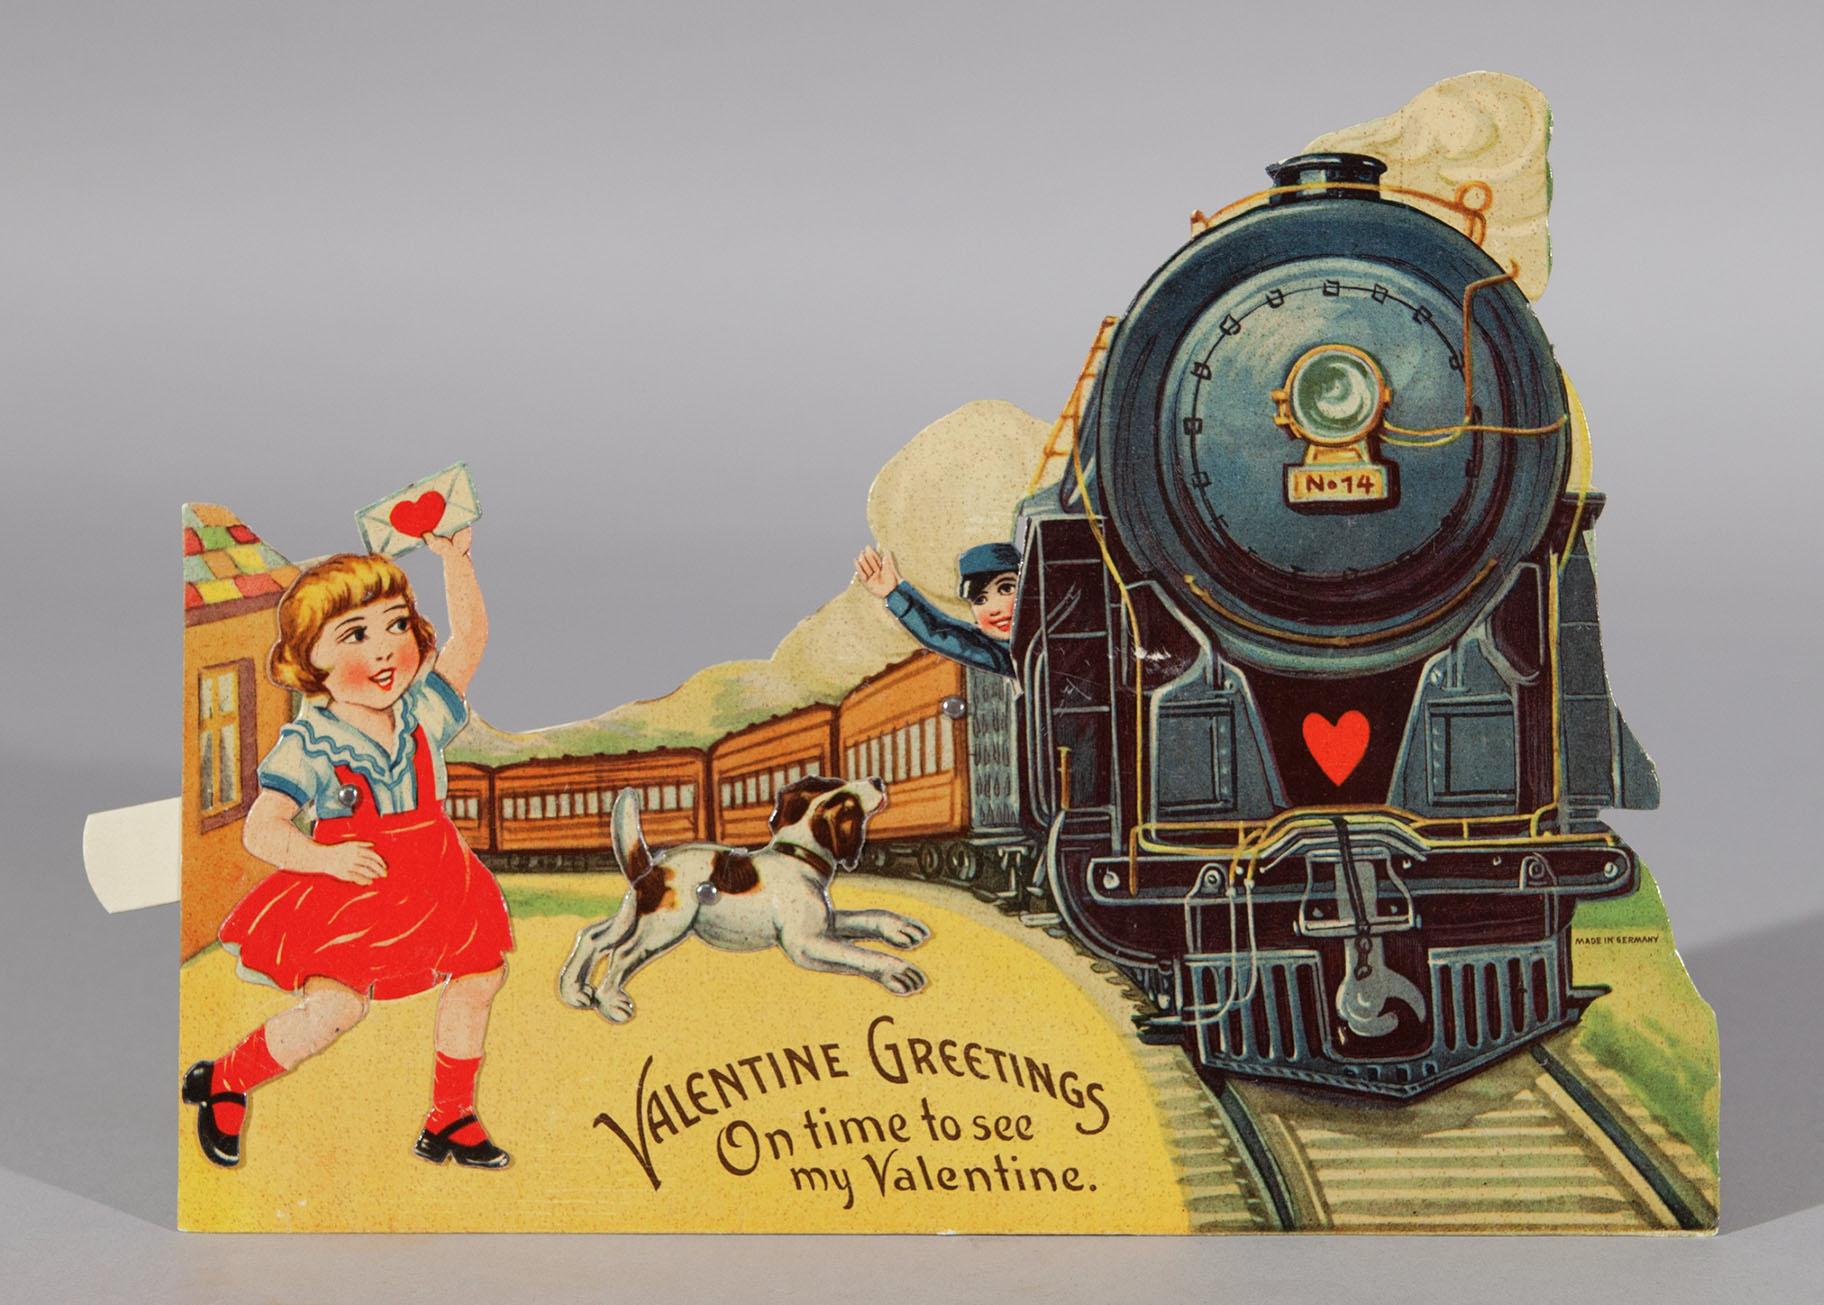 Vintage valentine from the Andrew McNally collection at the Newberry Library. (Courtesy of the Newberry Library)